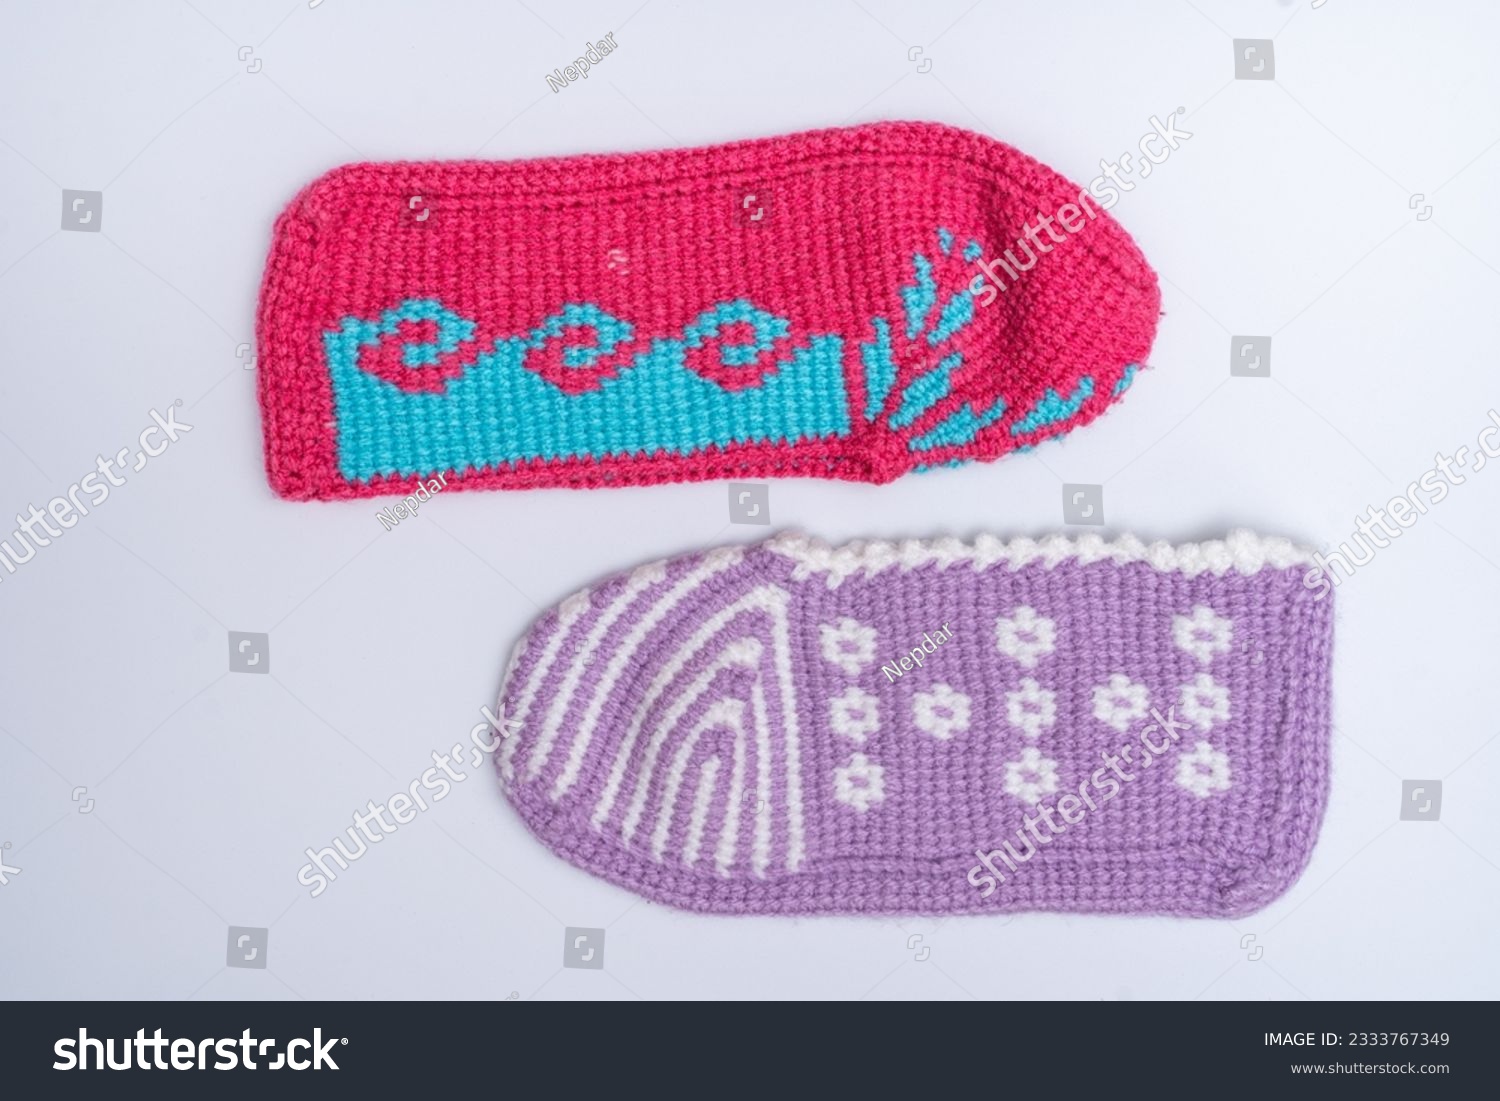 winter knitted socks.
Wool knit booties decorated with Anatolian motifs #2333767349